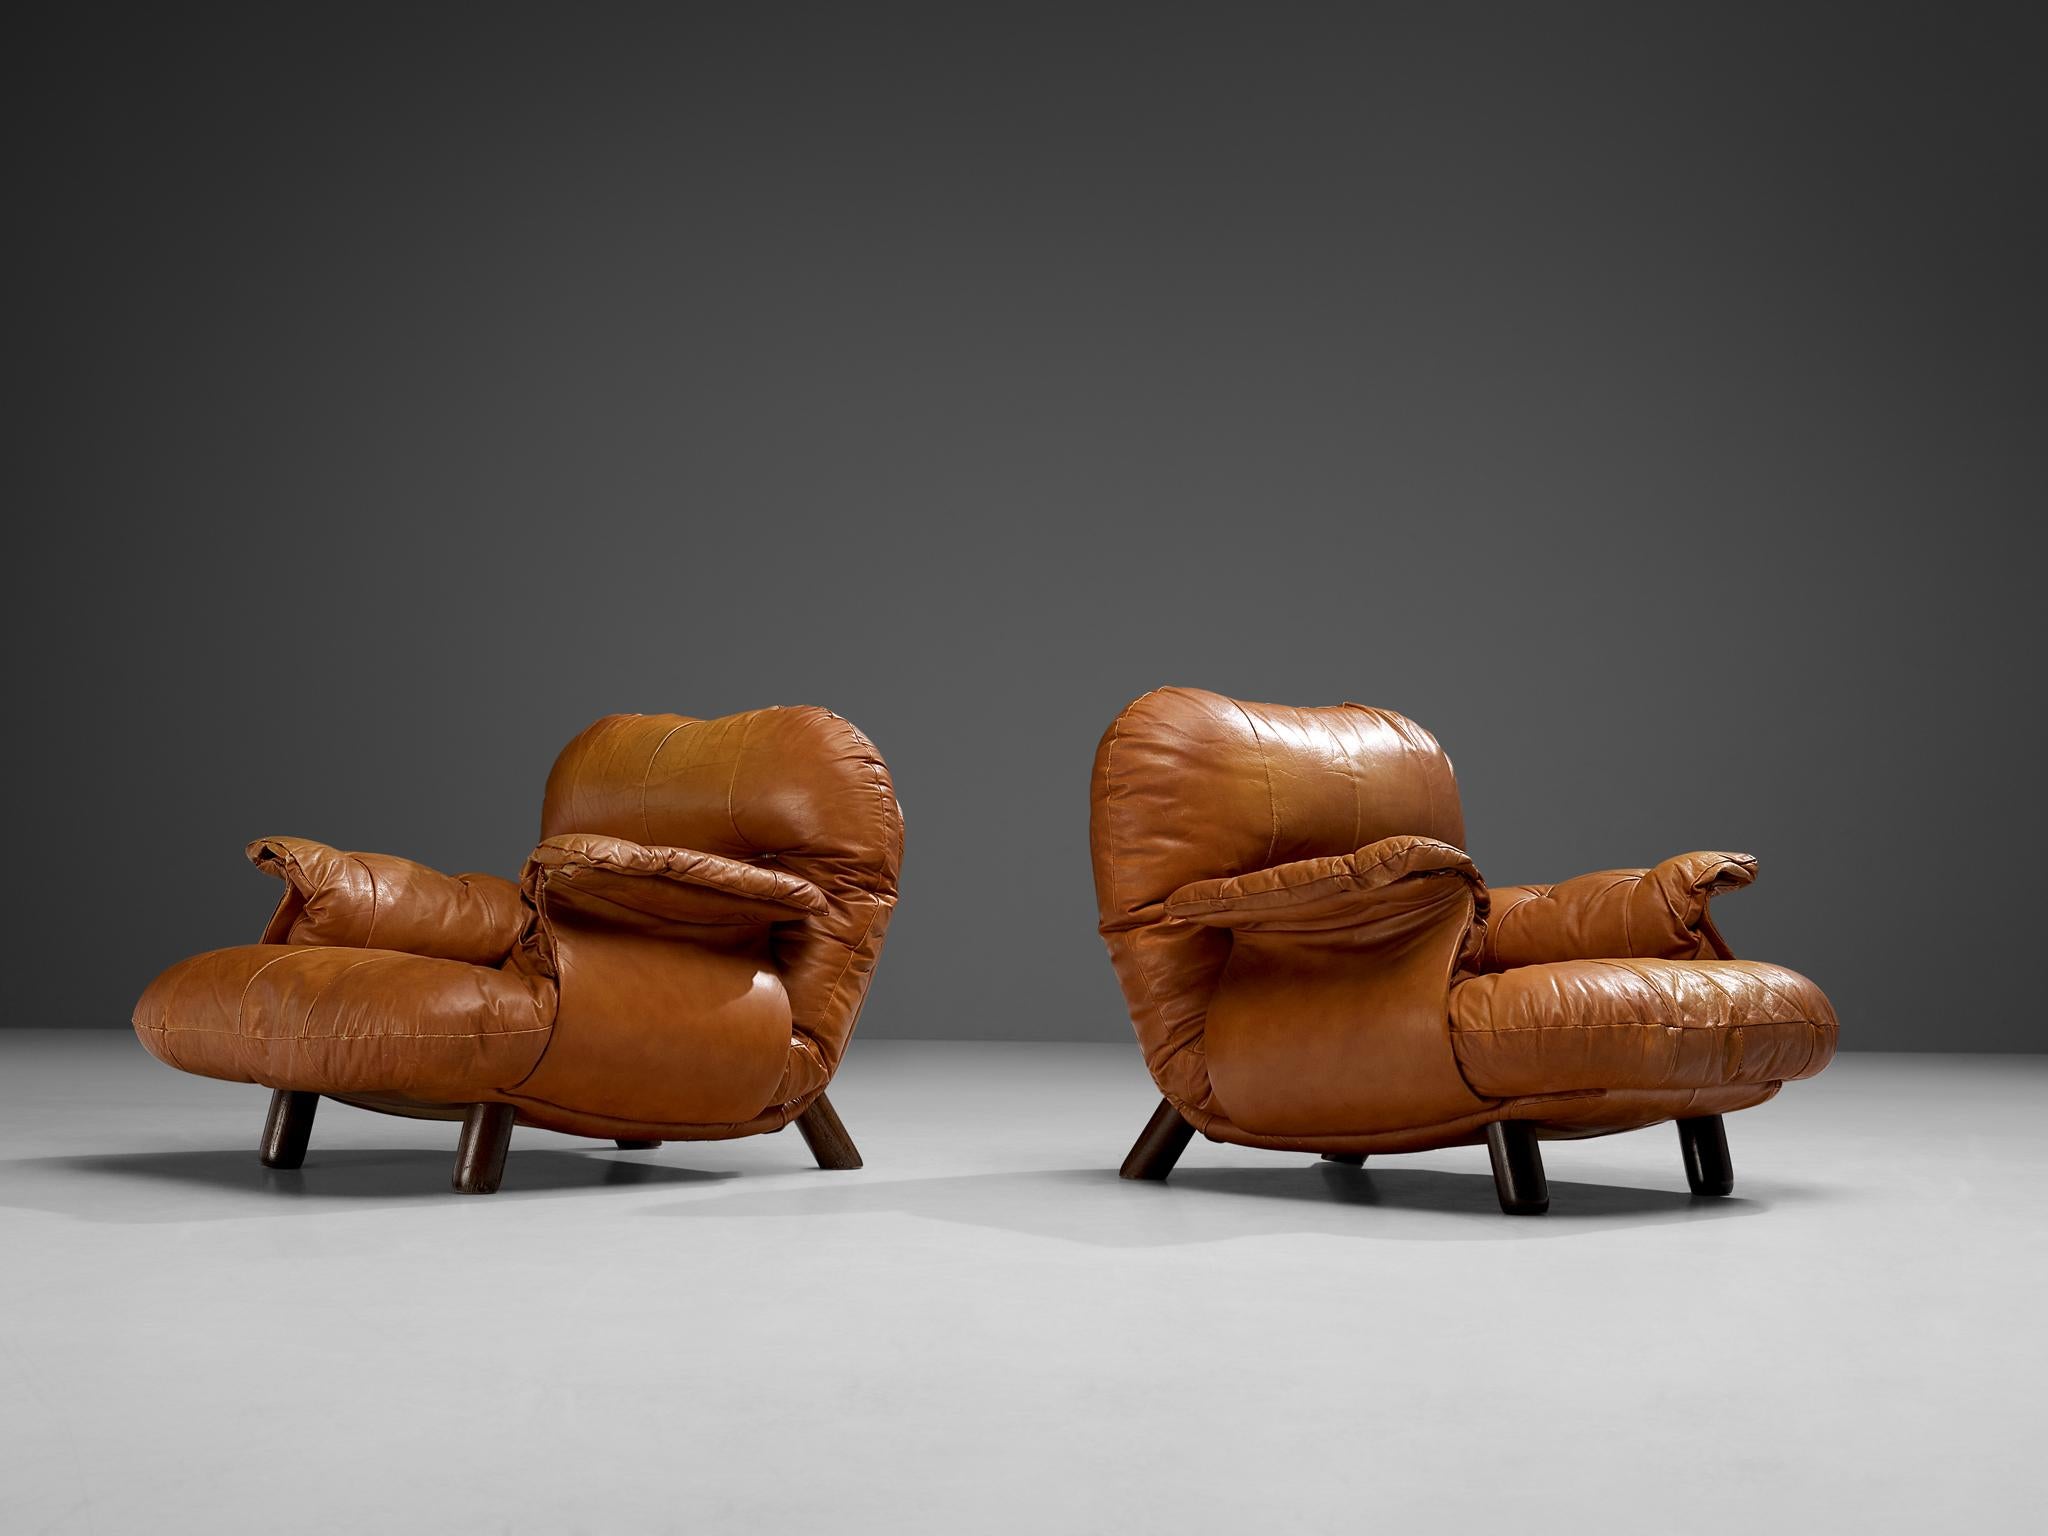 E. Cobianchi for Insa, pair of lounge chairs, leather and wood, Italy, 1970s

An Italian set of two bulky lounge chairs designed by E. Cobianchi. The lounge chairs feature thick, tufted seats and backrests. The armrests are curved in an extravagant